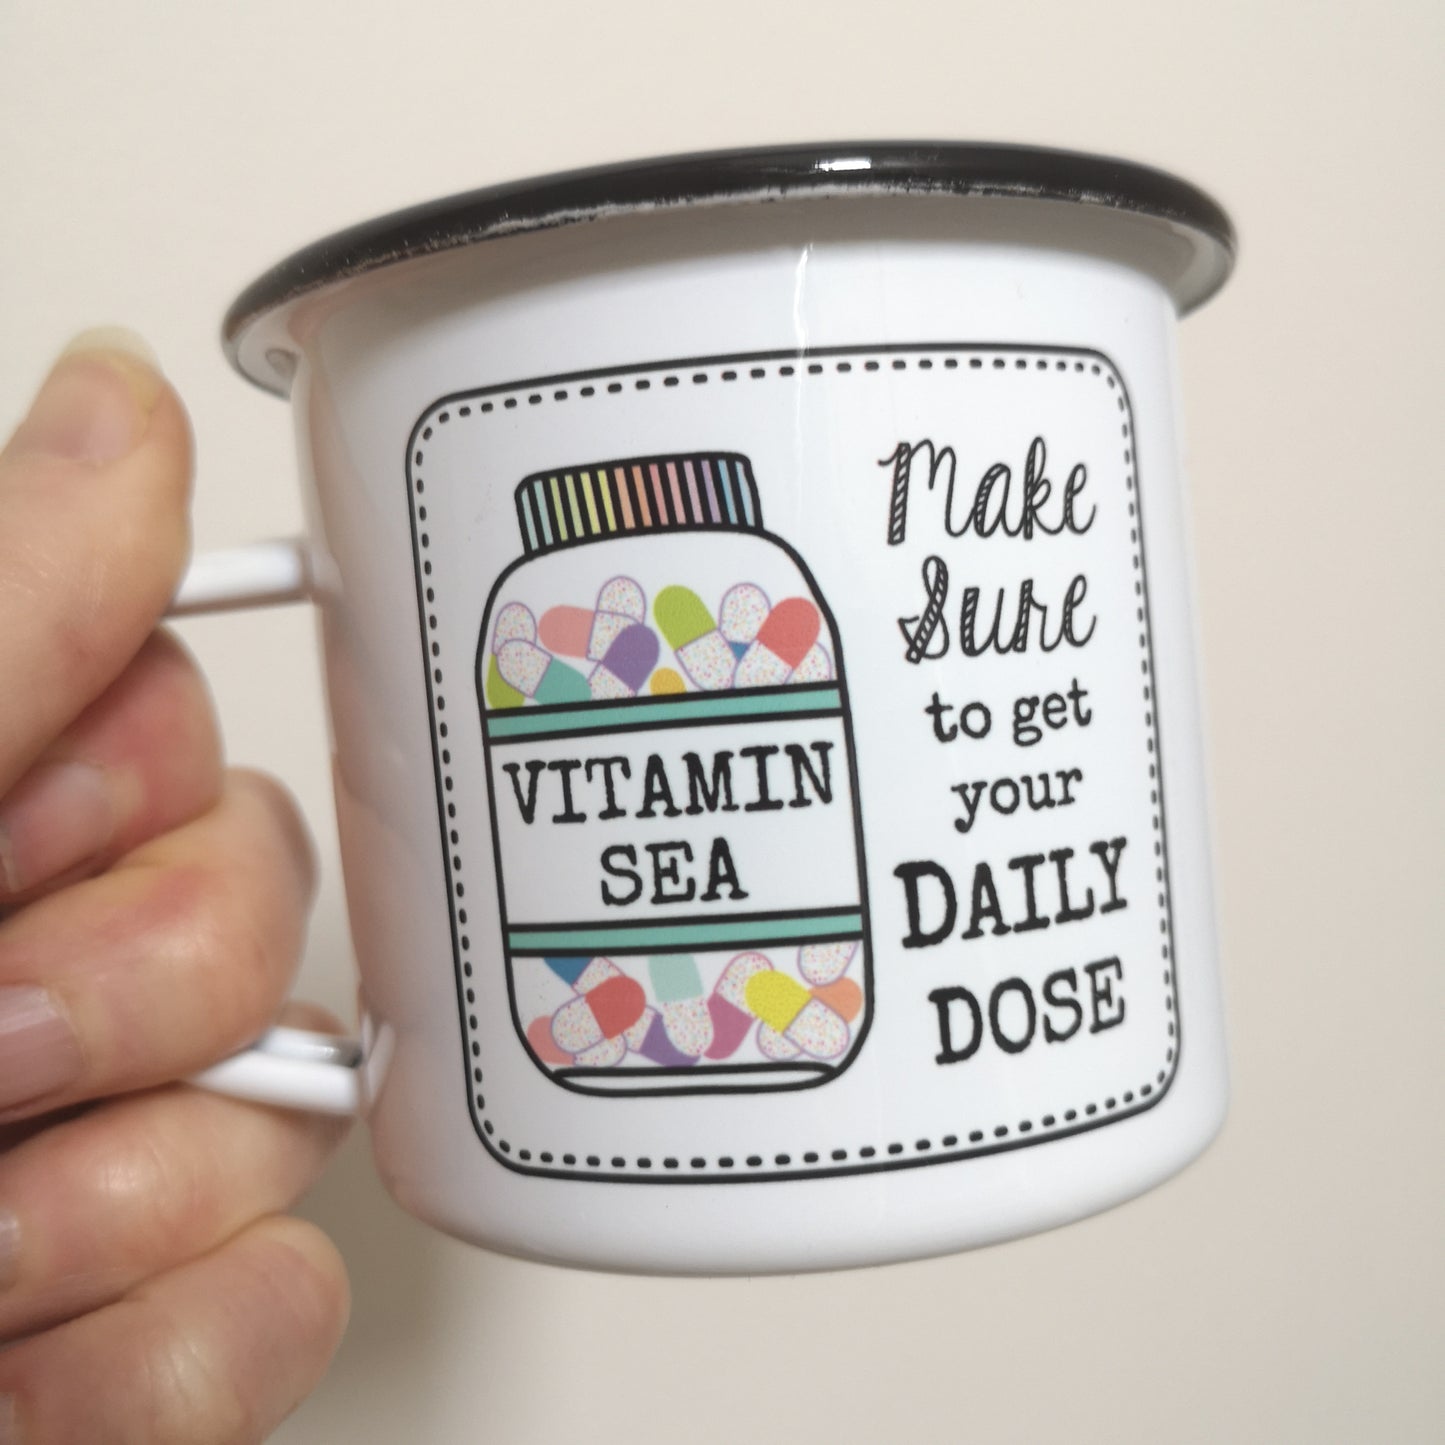 A close up photo of someone holding a White enamel mug with a black rim with the following on the front - a framed hand drawn image of a vitamin jar filled with brightly coloured pills and text to the right of it that says "make Sure to get your daily dose". The bottle has a VITAMIN SEA label on it.